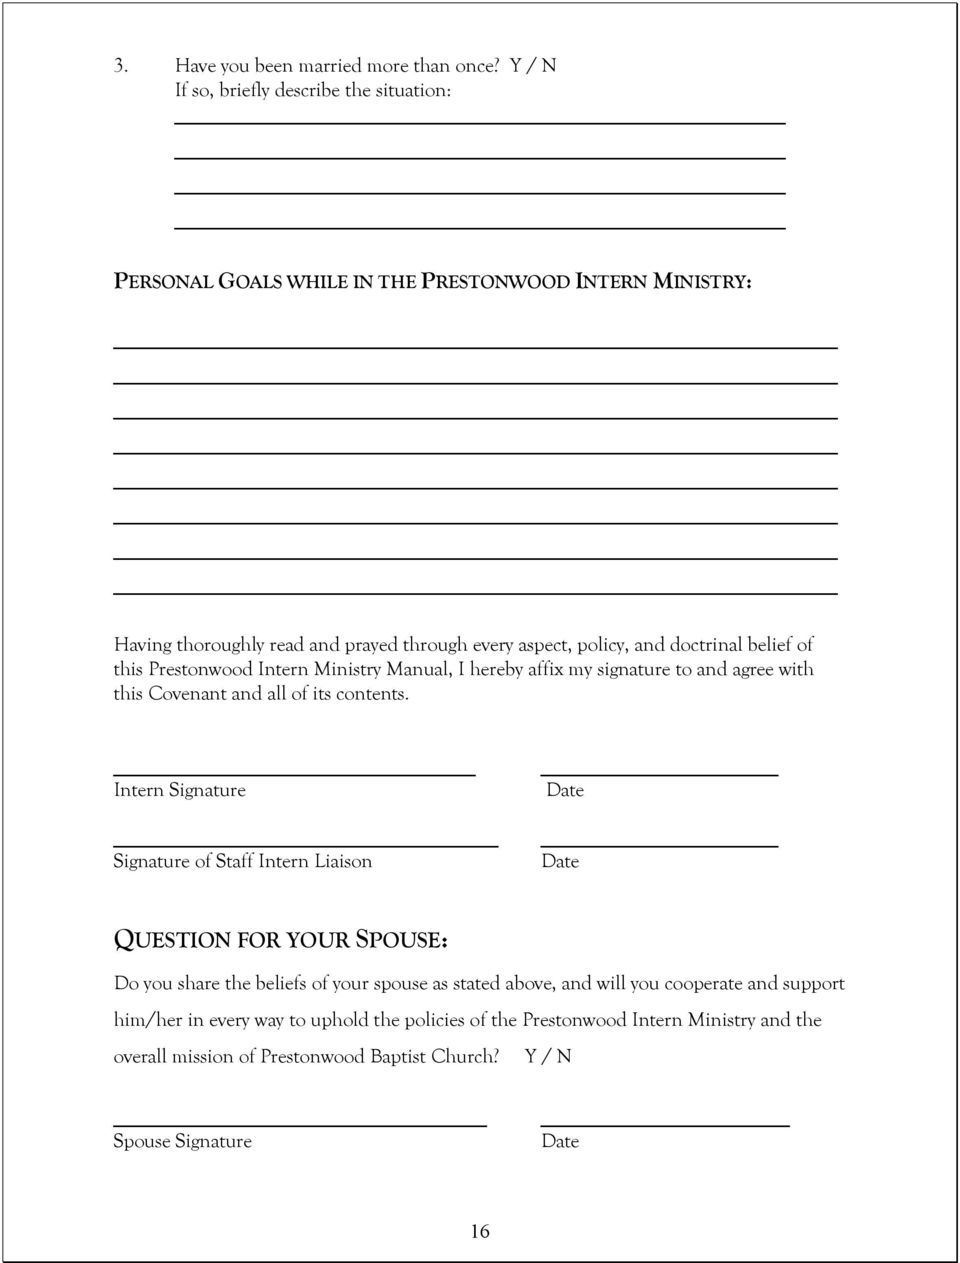 doctrinal belief of this Prestonwood Intern Ministry Manual, I hereby affix my signature to and agree with this Covenant and all of its contents.